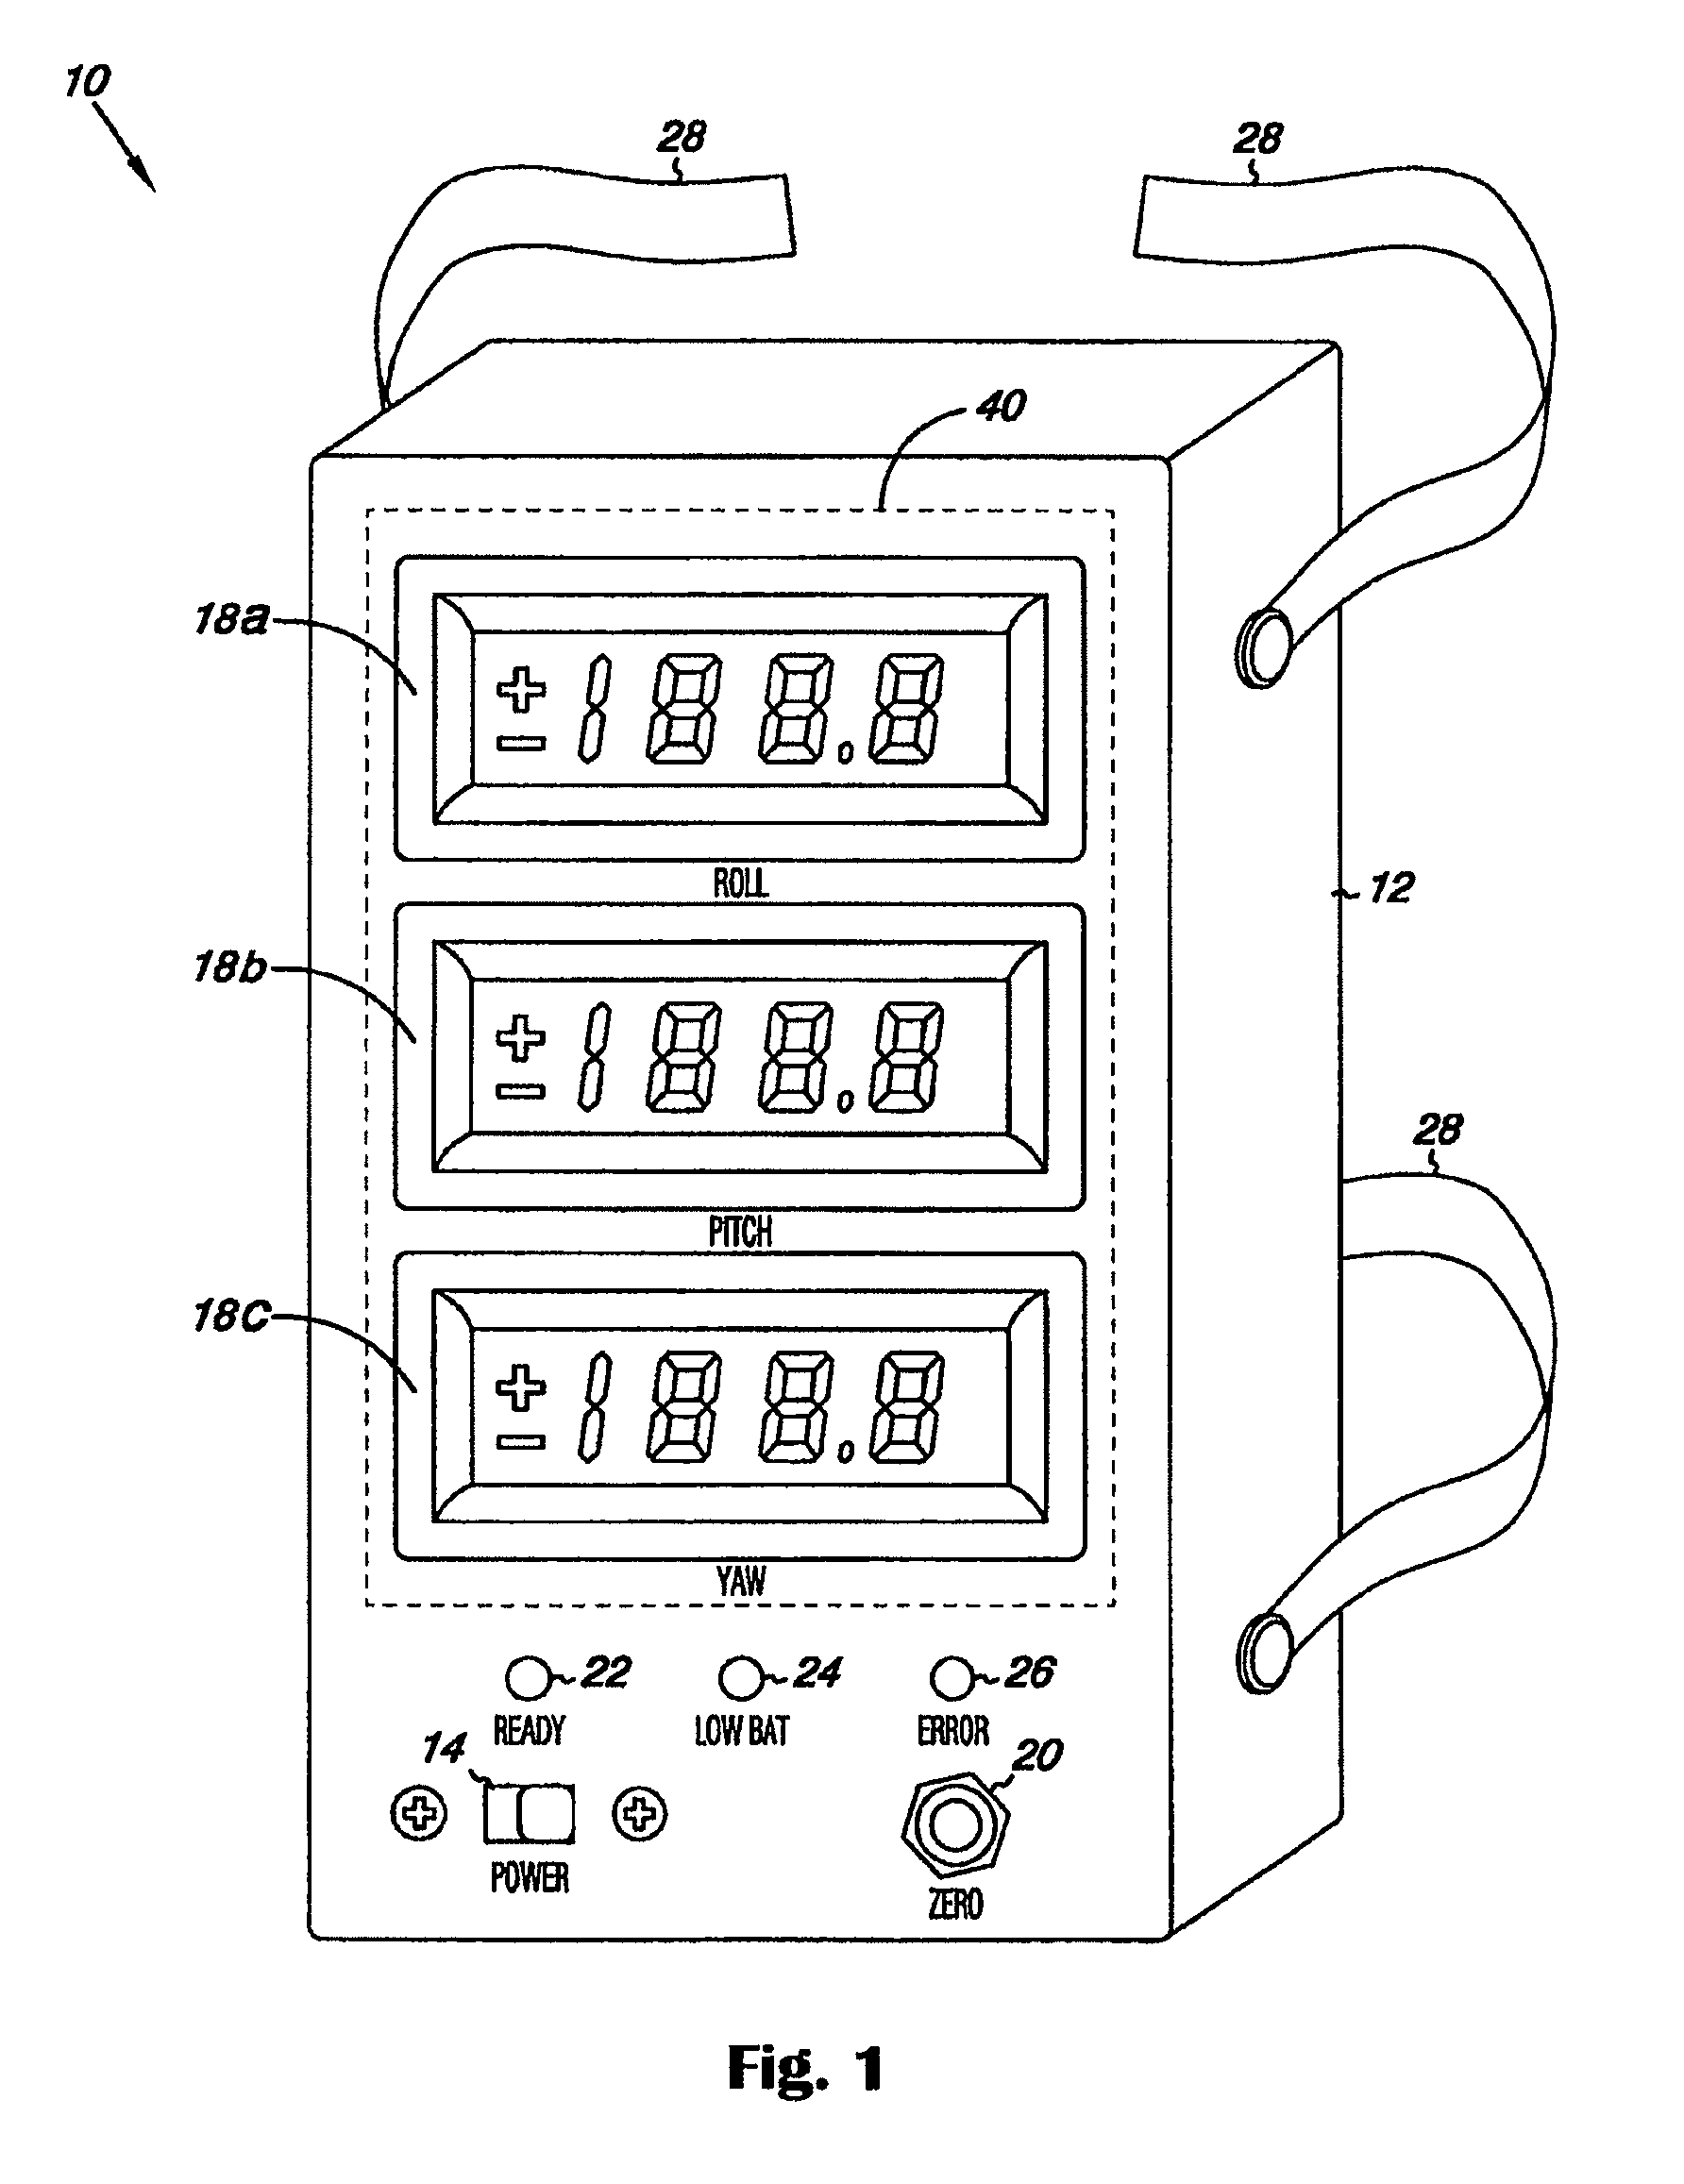 Surgical orientation device and method